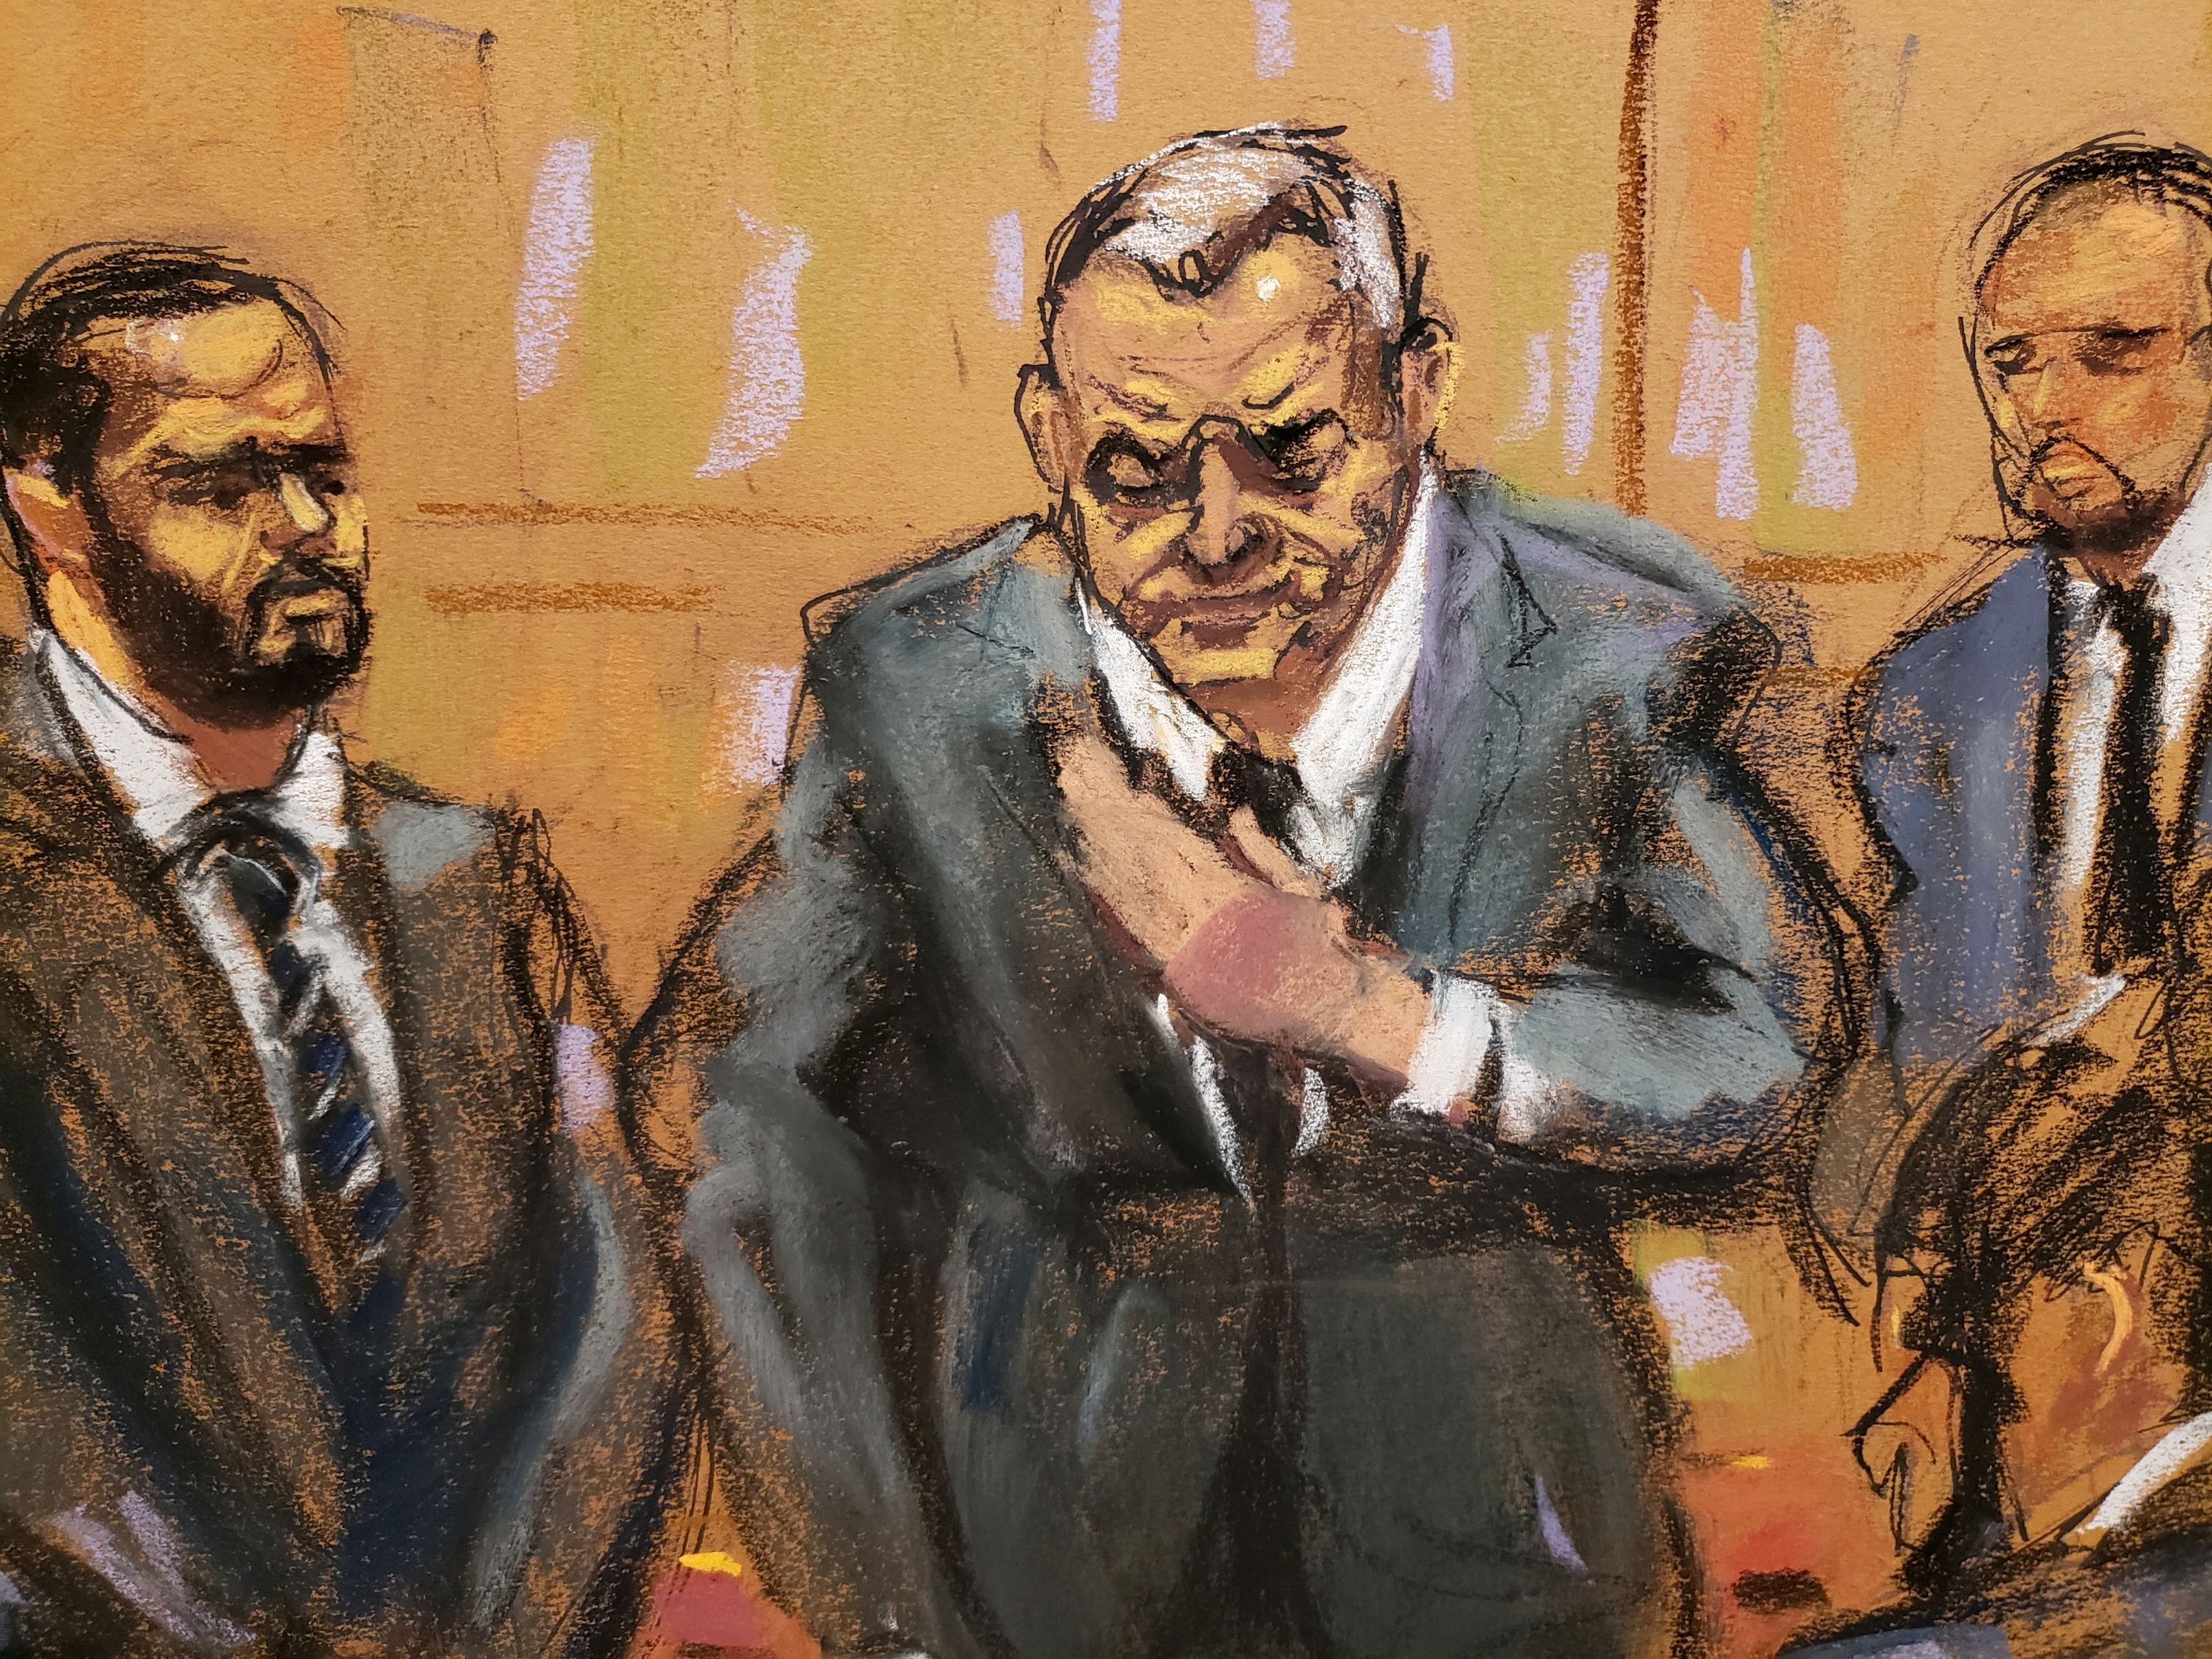 Mexico's former Public Security Minister Genaro Garcia Luna gestures to his wife and two children seated in audience, before being escorted out of the courtroom by U.S. Marshalls in New York City, U.S., February 21, 2023 in this courtroom sketch. Garcia is on trial for charges that he accepted millions of dollars to protect the powerful Sinaloa Cartel, once run by imprisoned drug lord Joaquin "El Chapo" Guzman. REUTERS/Jane Rosenberg  REFILE - CORRECTING ACTION